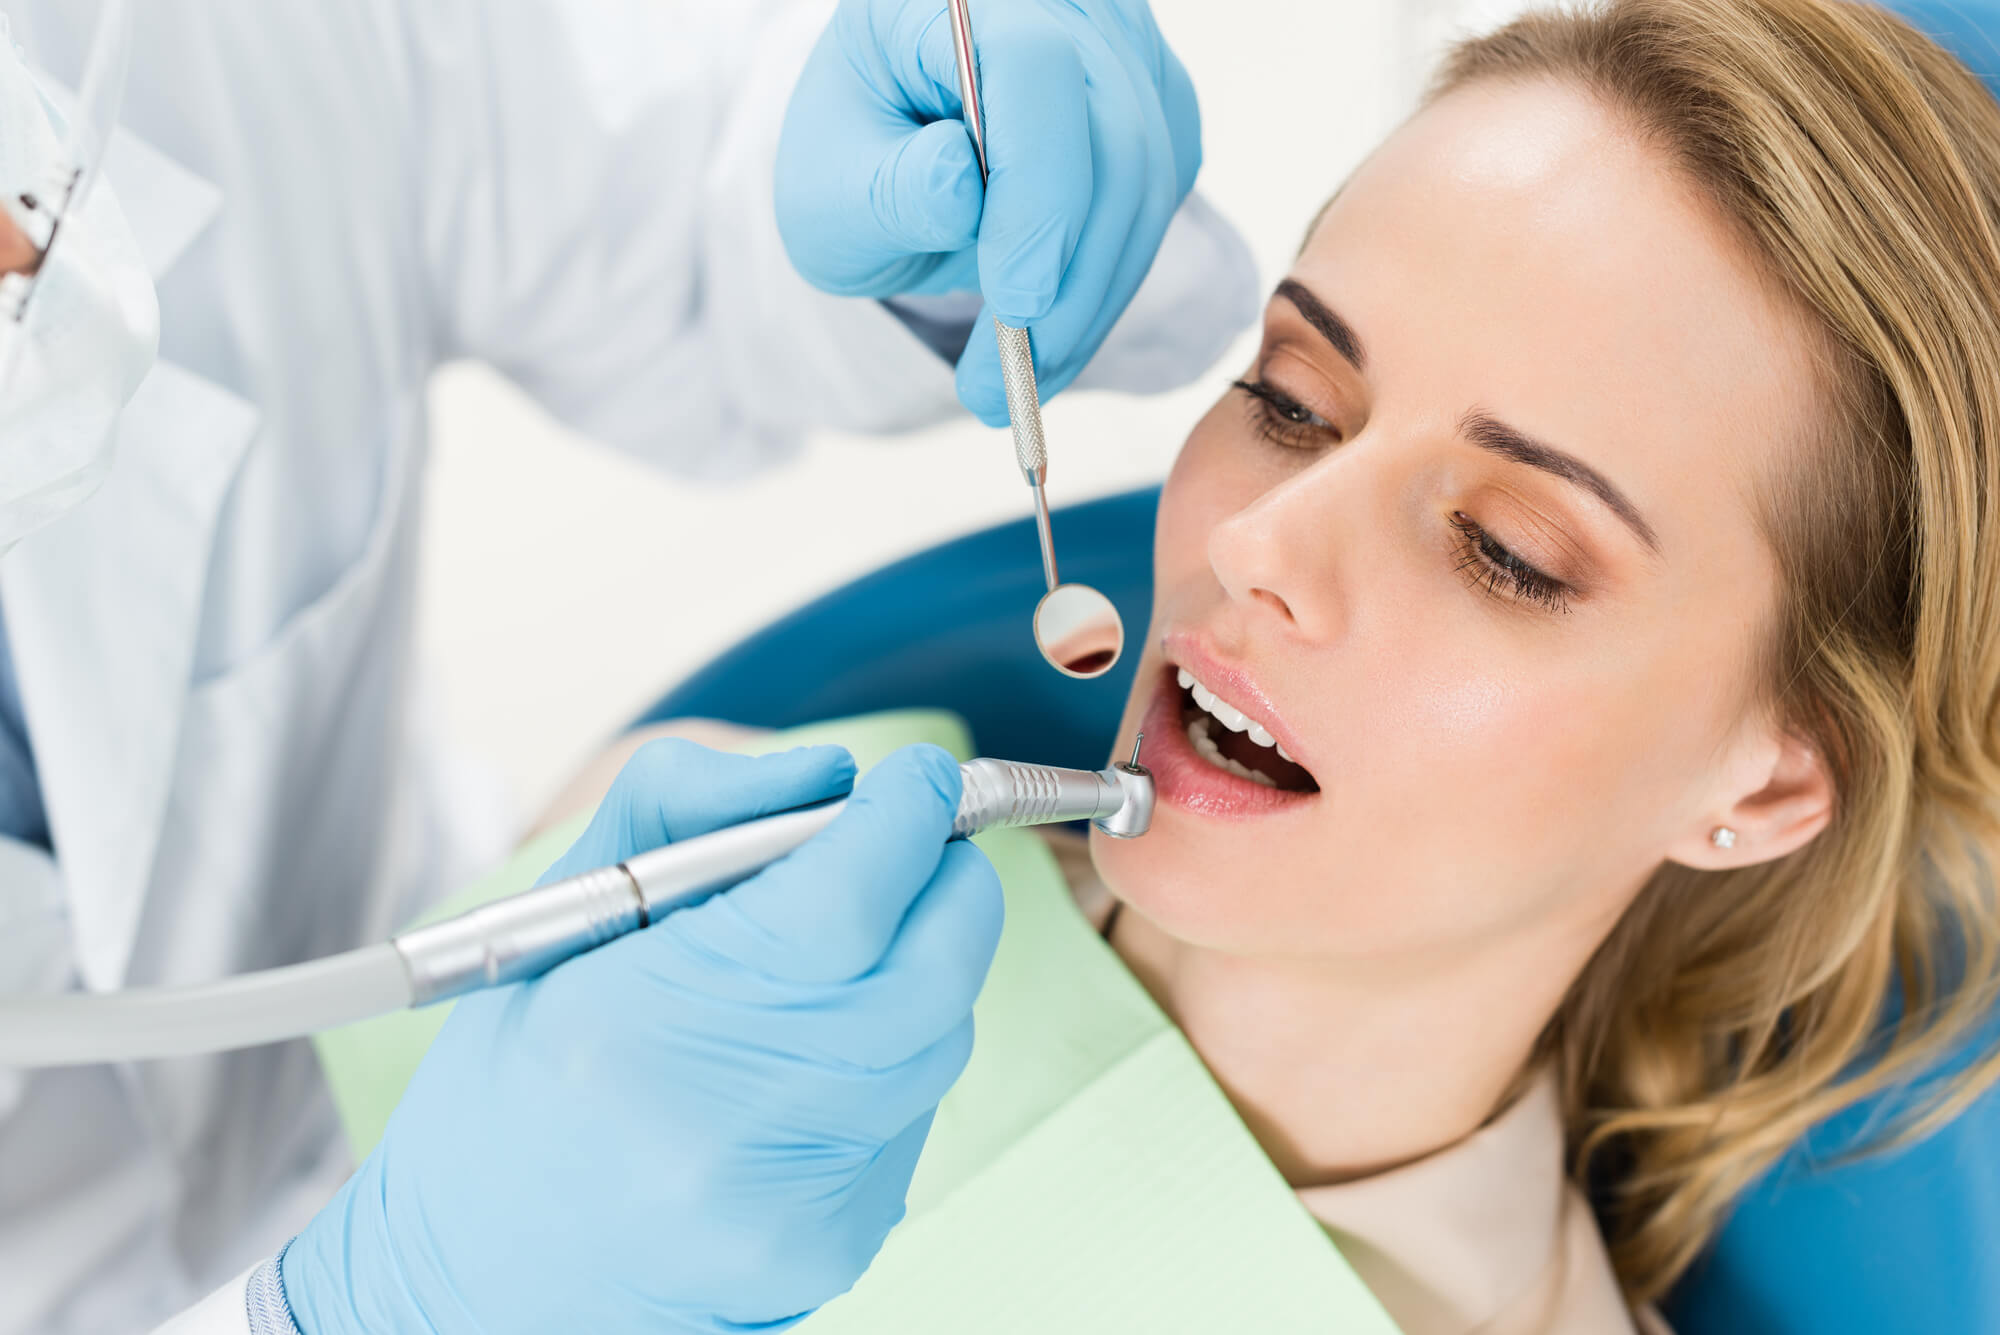 where to find the best dentist in kendall miami?